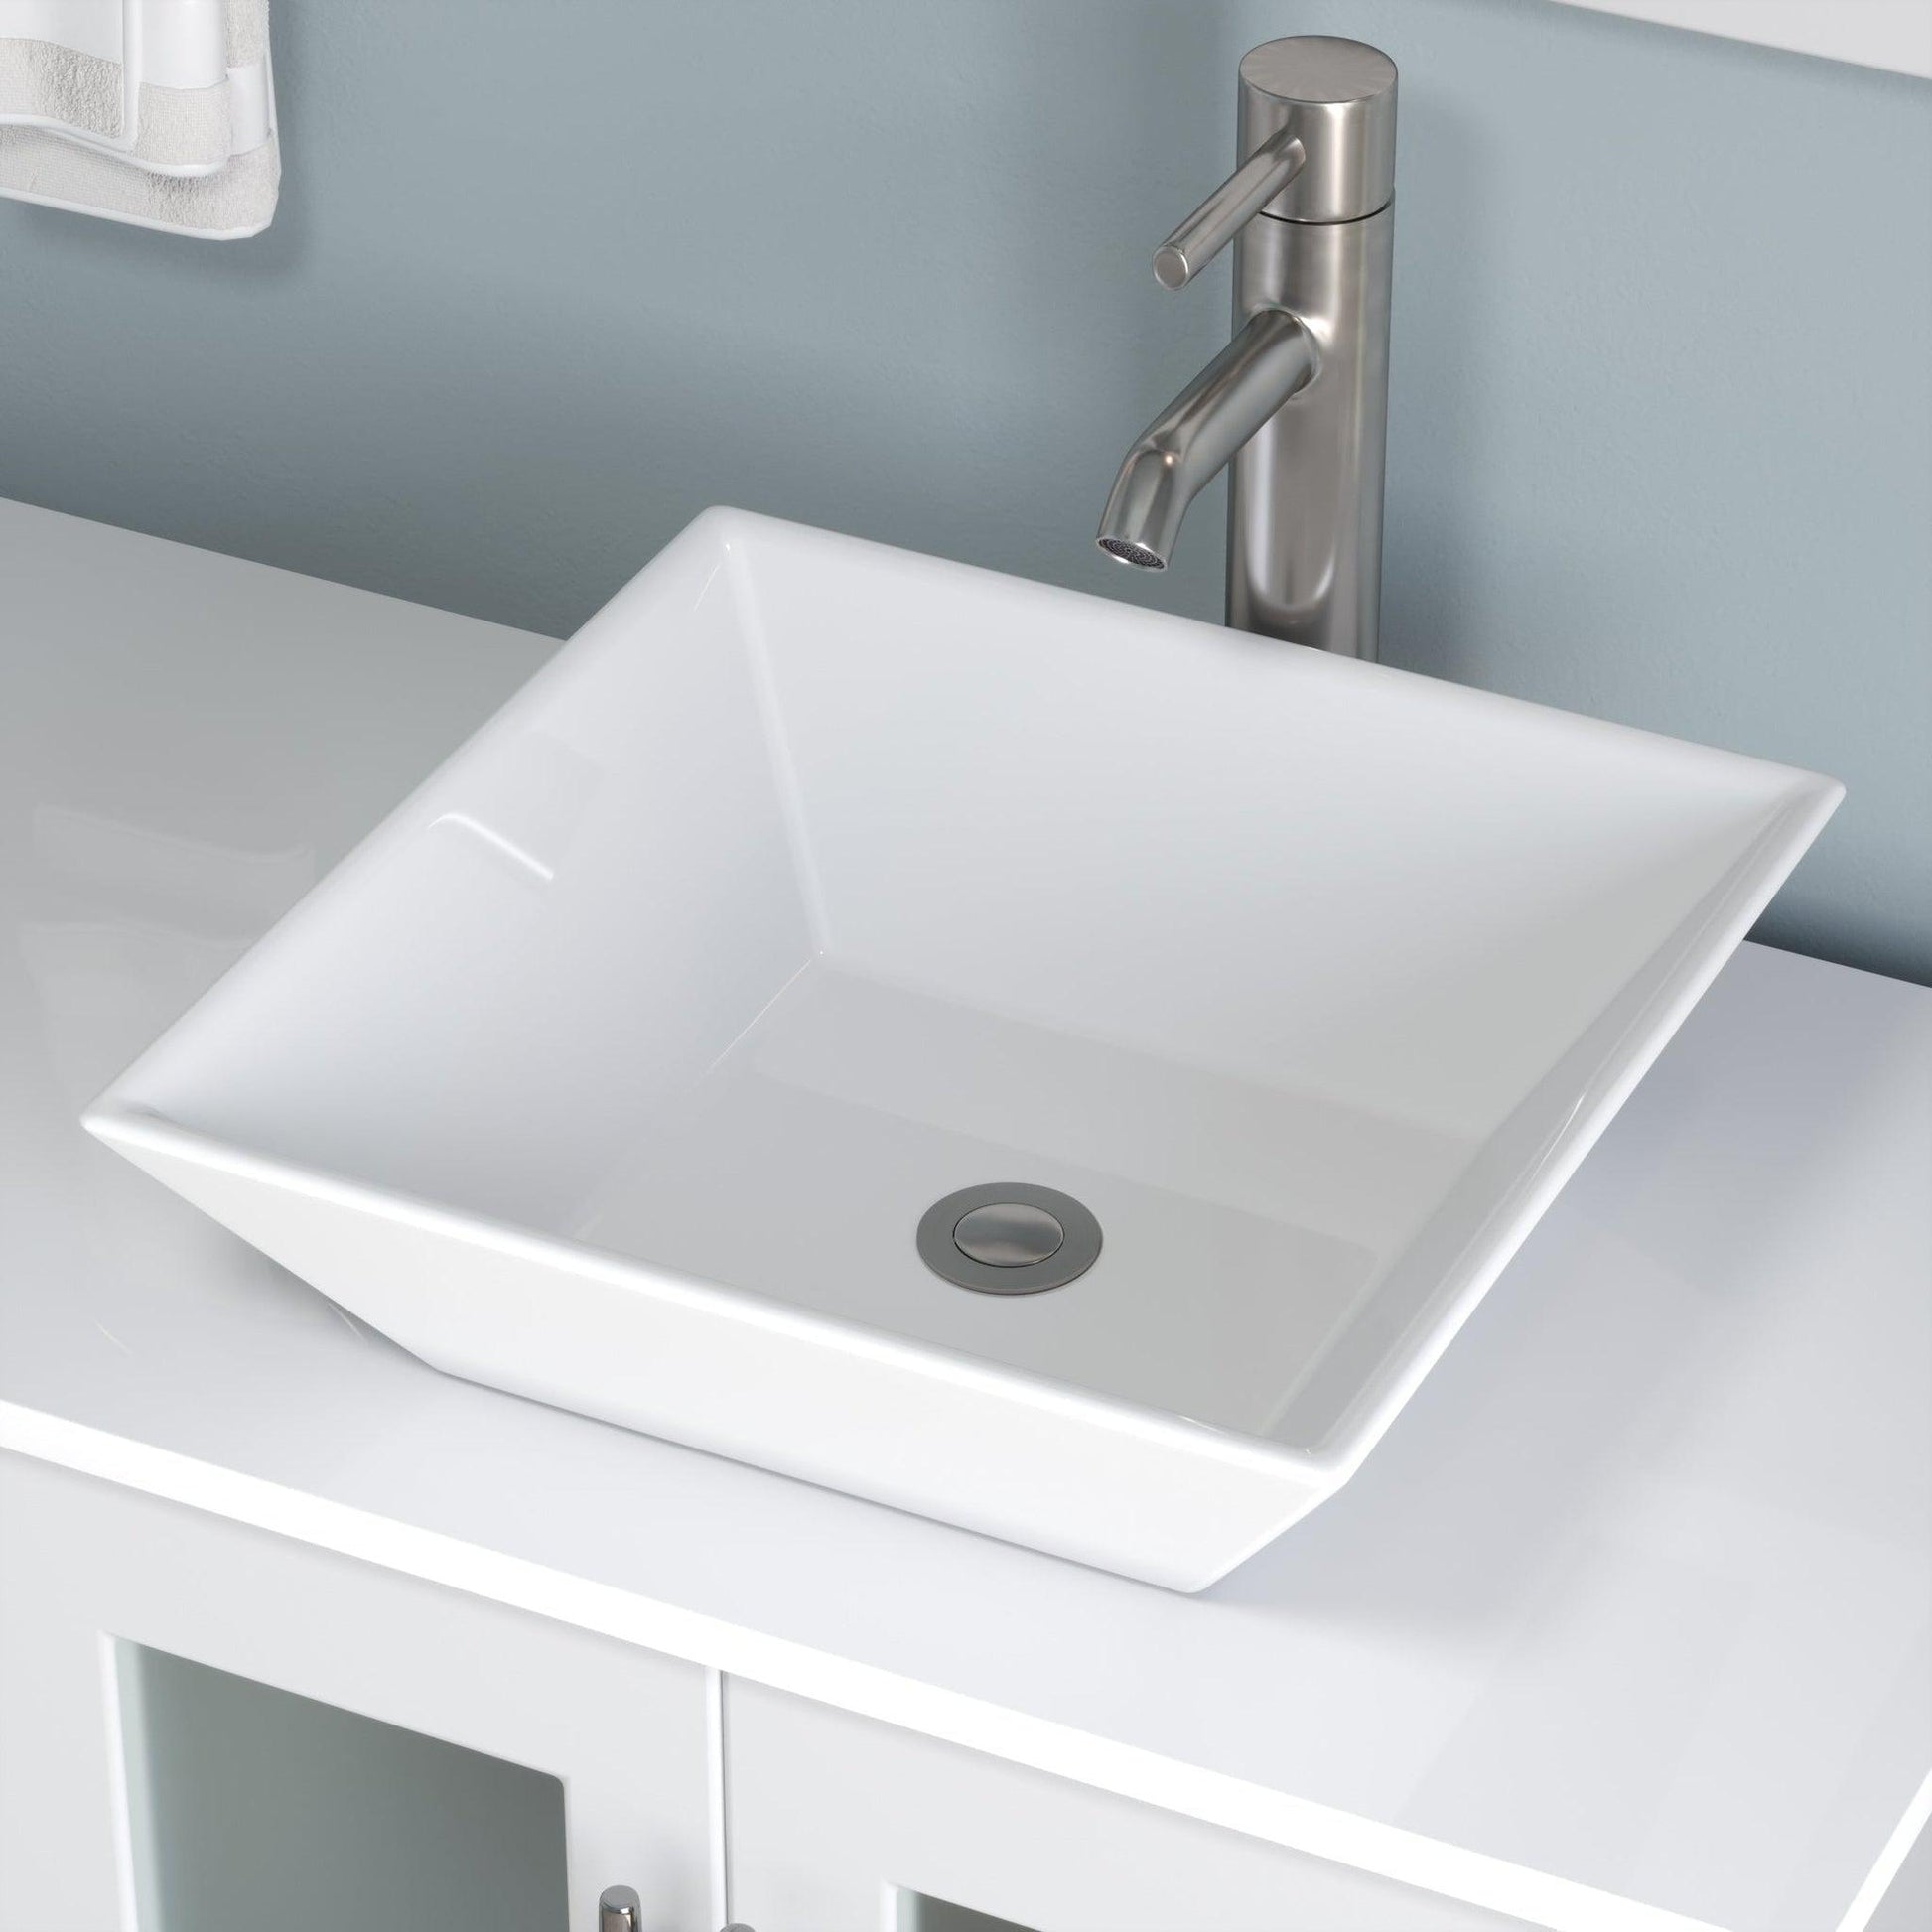 Cambridge Plumbing 72" White Wood Double Vanity Set With Porcelain Countertop And Square Vessel Sink With Brushed Nickel Plumbing Finish